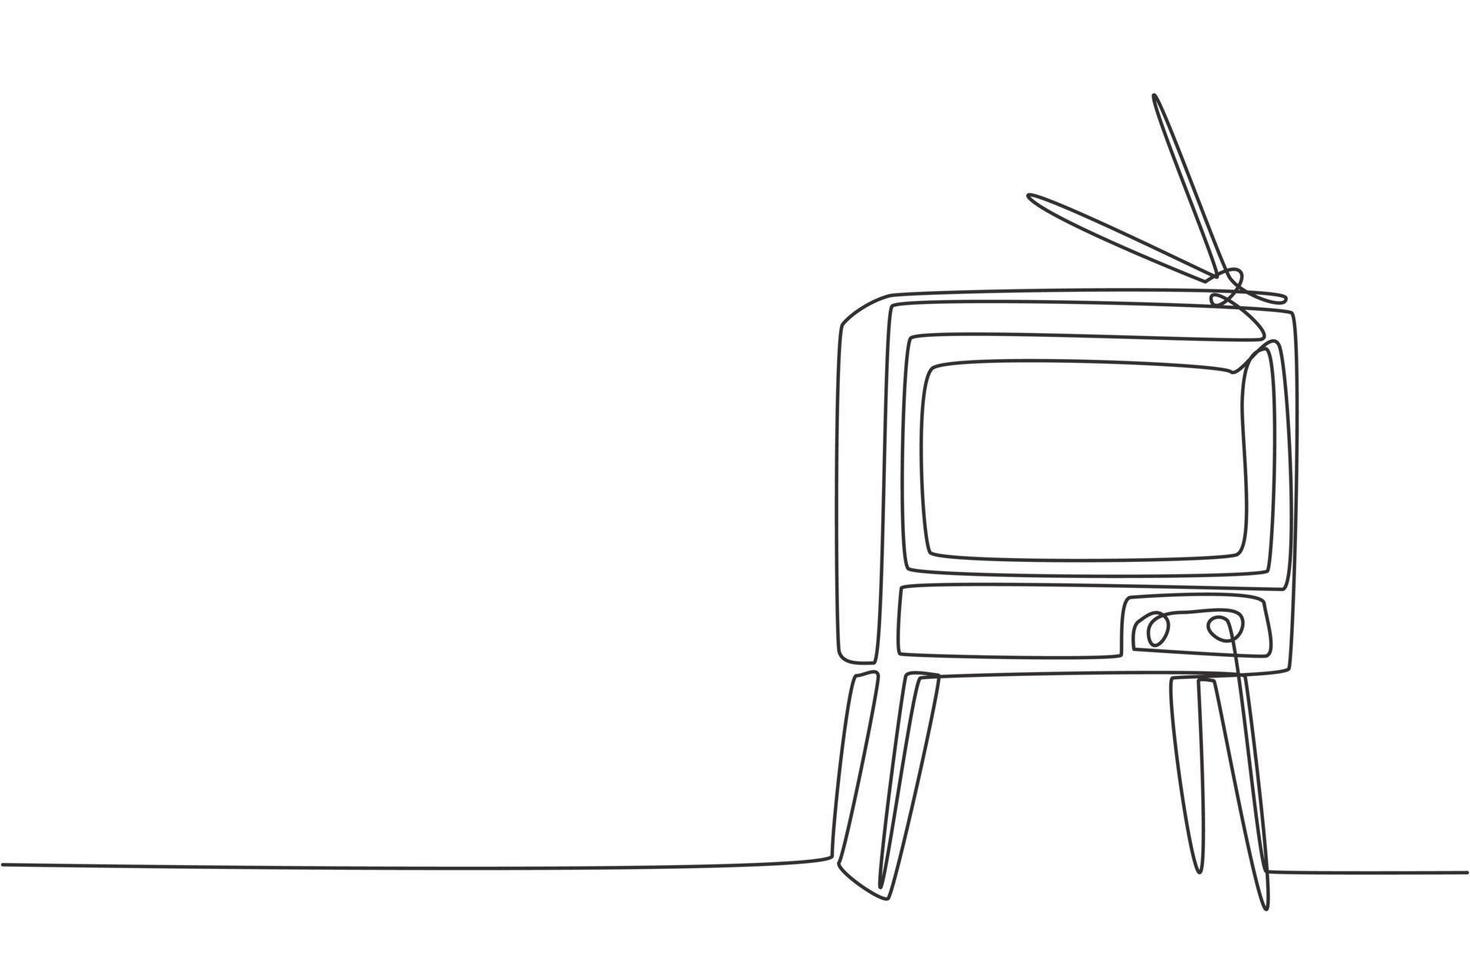 One continuous line drawing of retro old fashioned tv with wooden table and table legs. Classic vintage analog television concept single line draw design graphic vector illustration